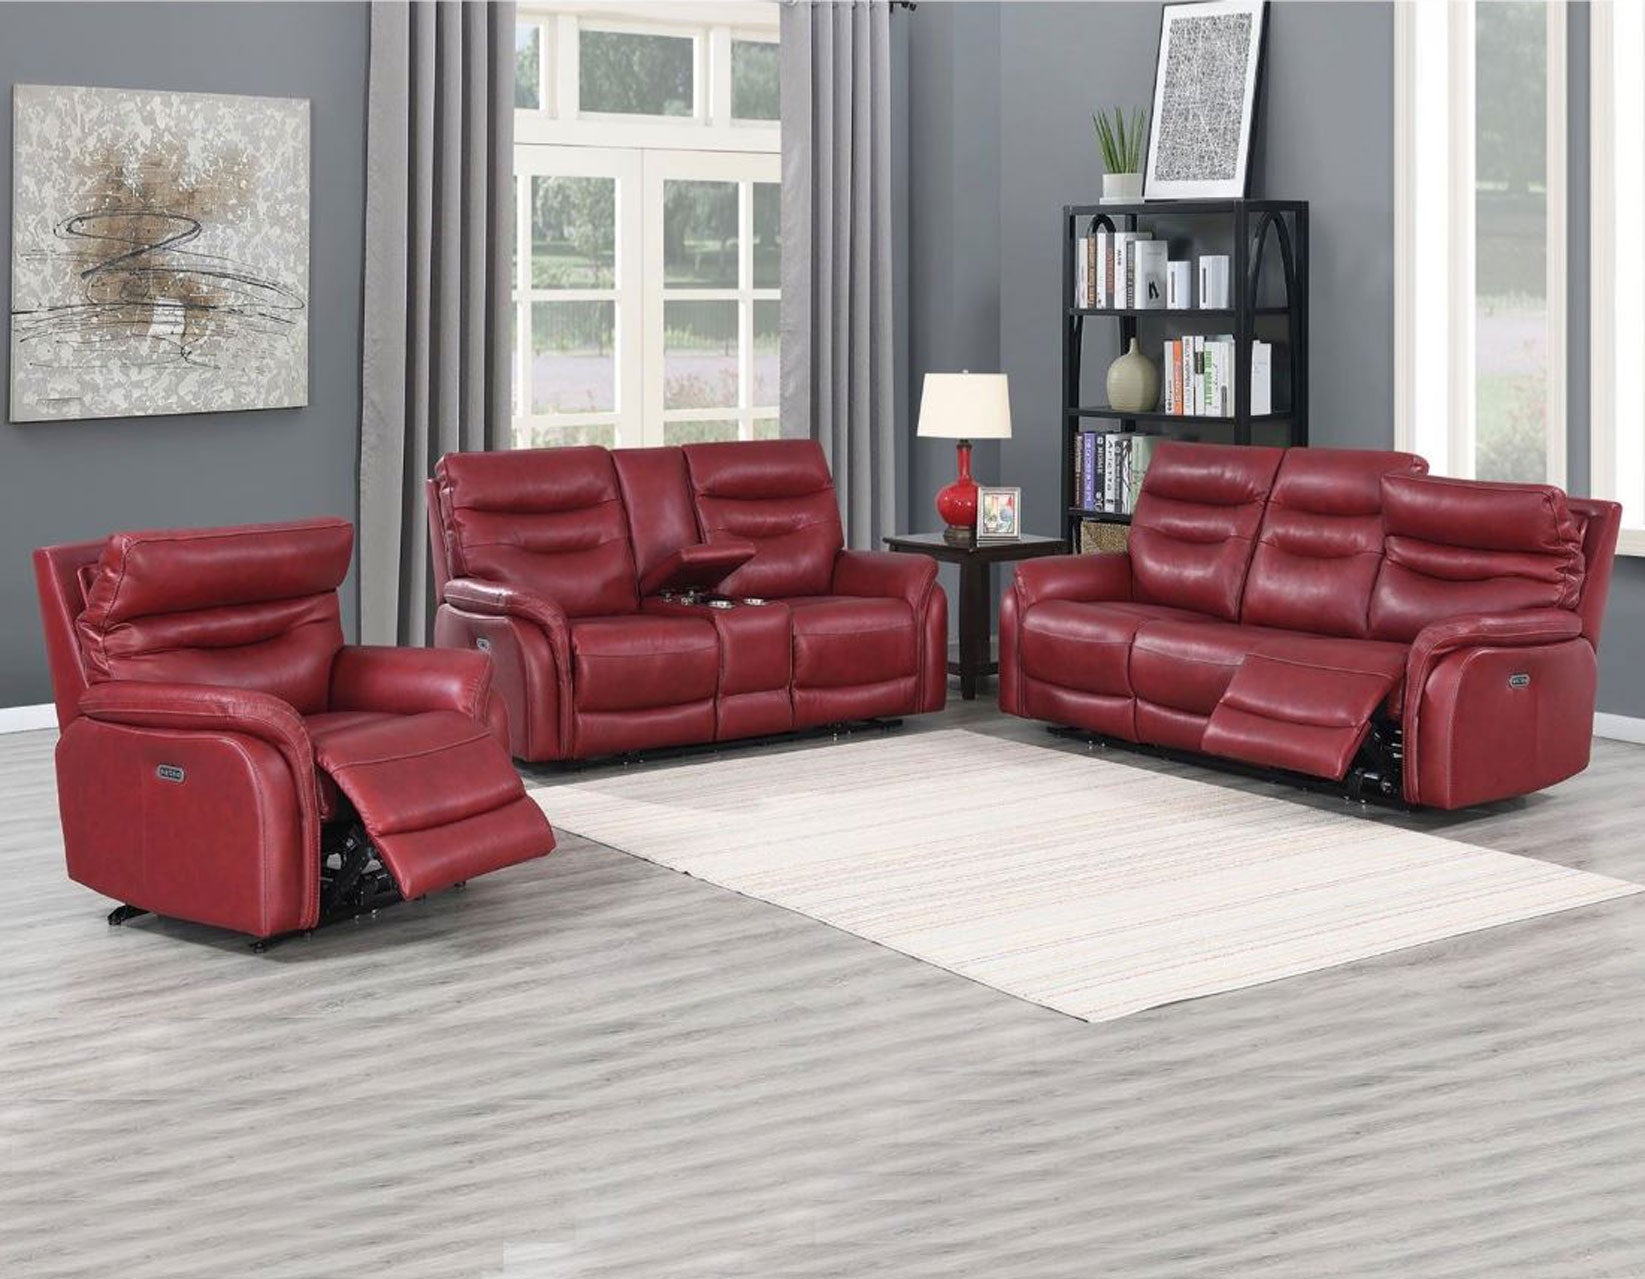 FORTUNA DUAL POWER LEATHER RECLINING 3 PIECE SET (SOFA,LOVESEAT & CHAIR)